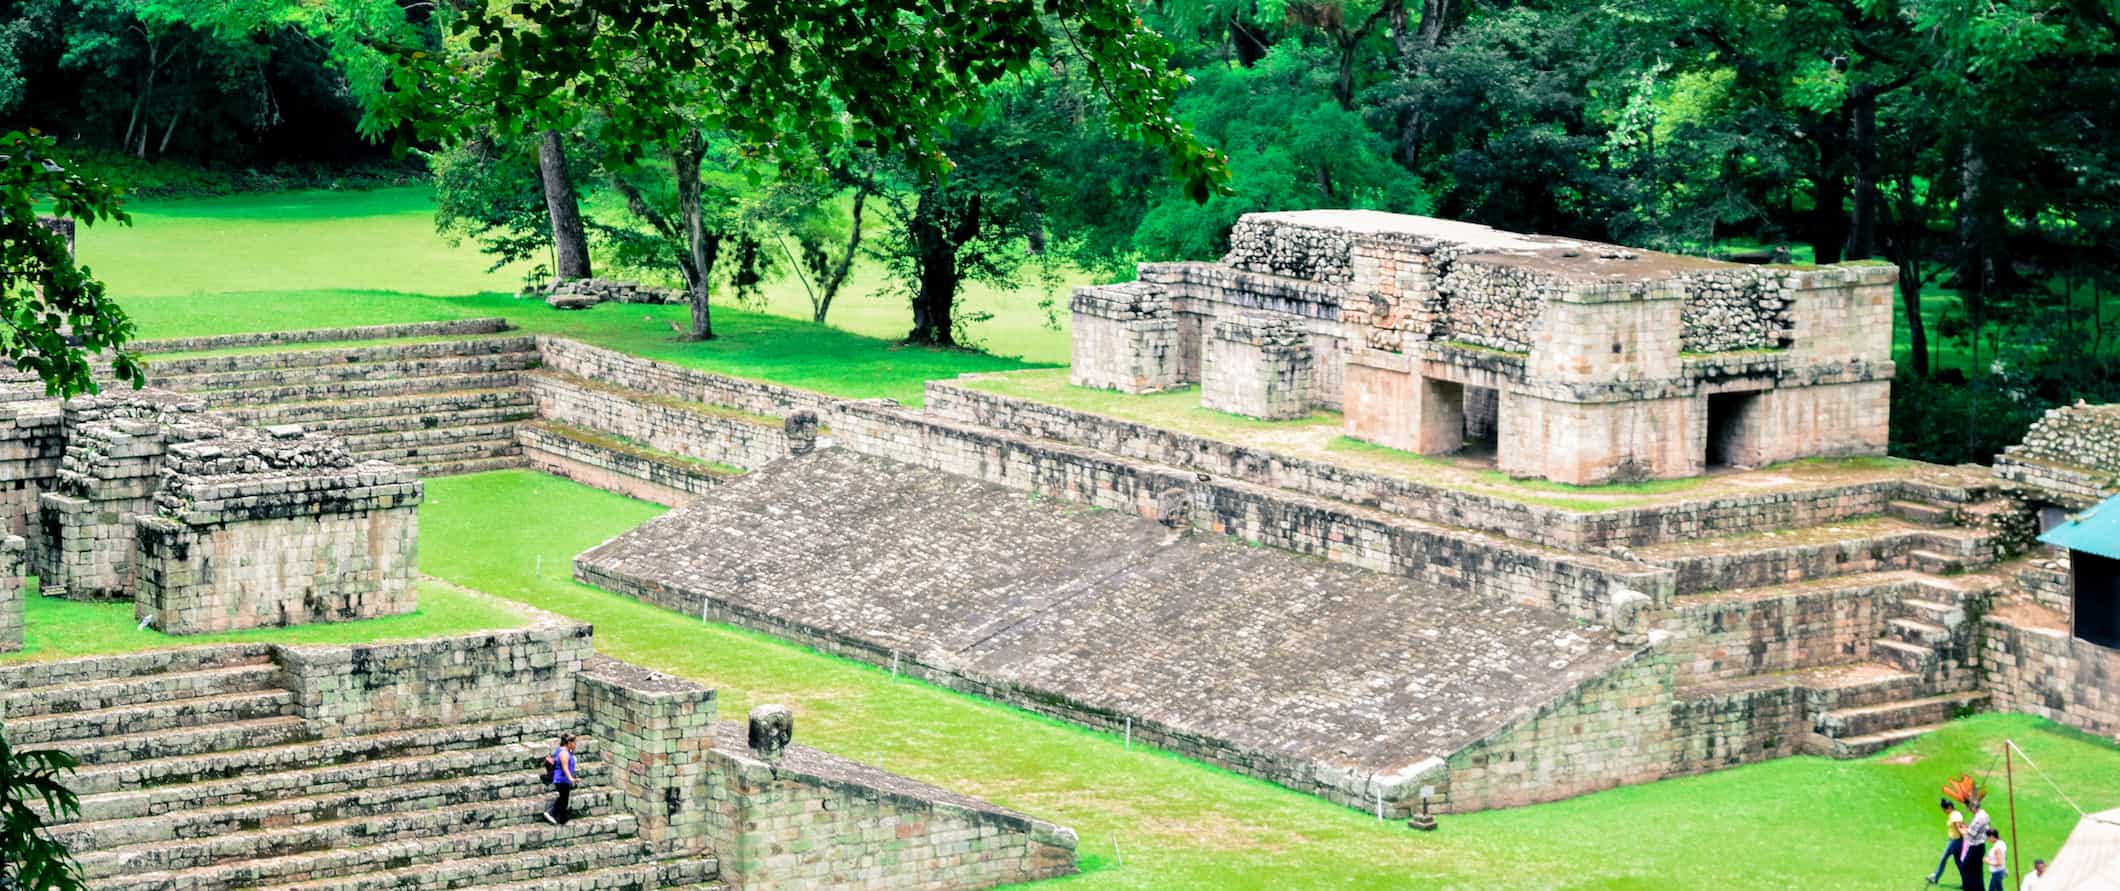 The ancient Copan ruins surrounded by jungle in Honduras